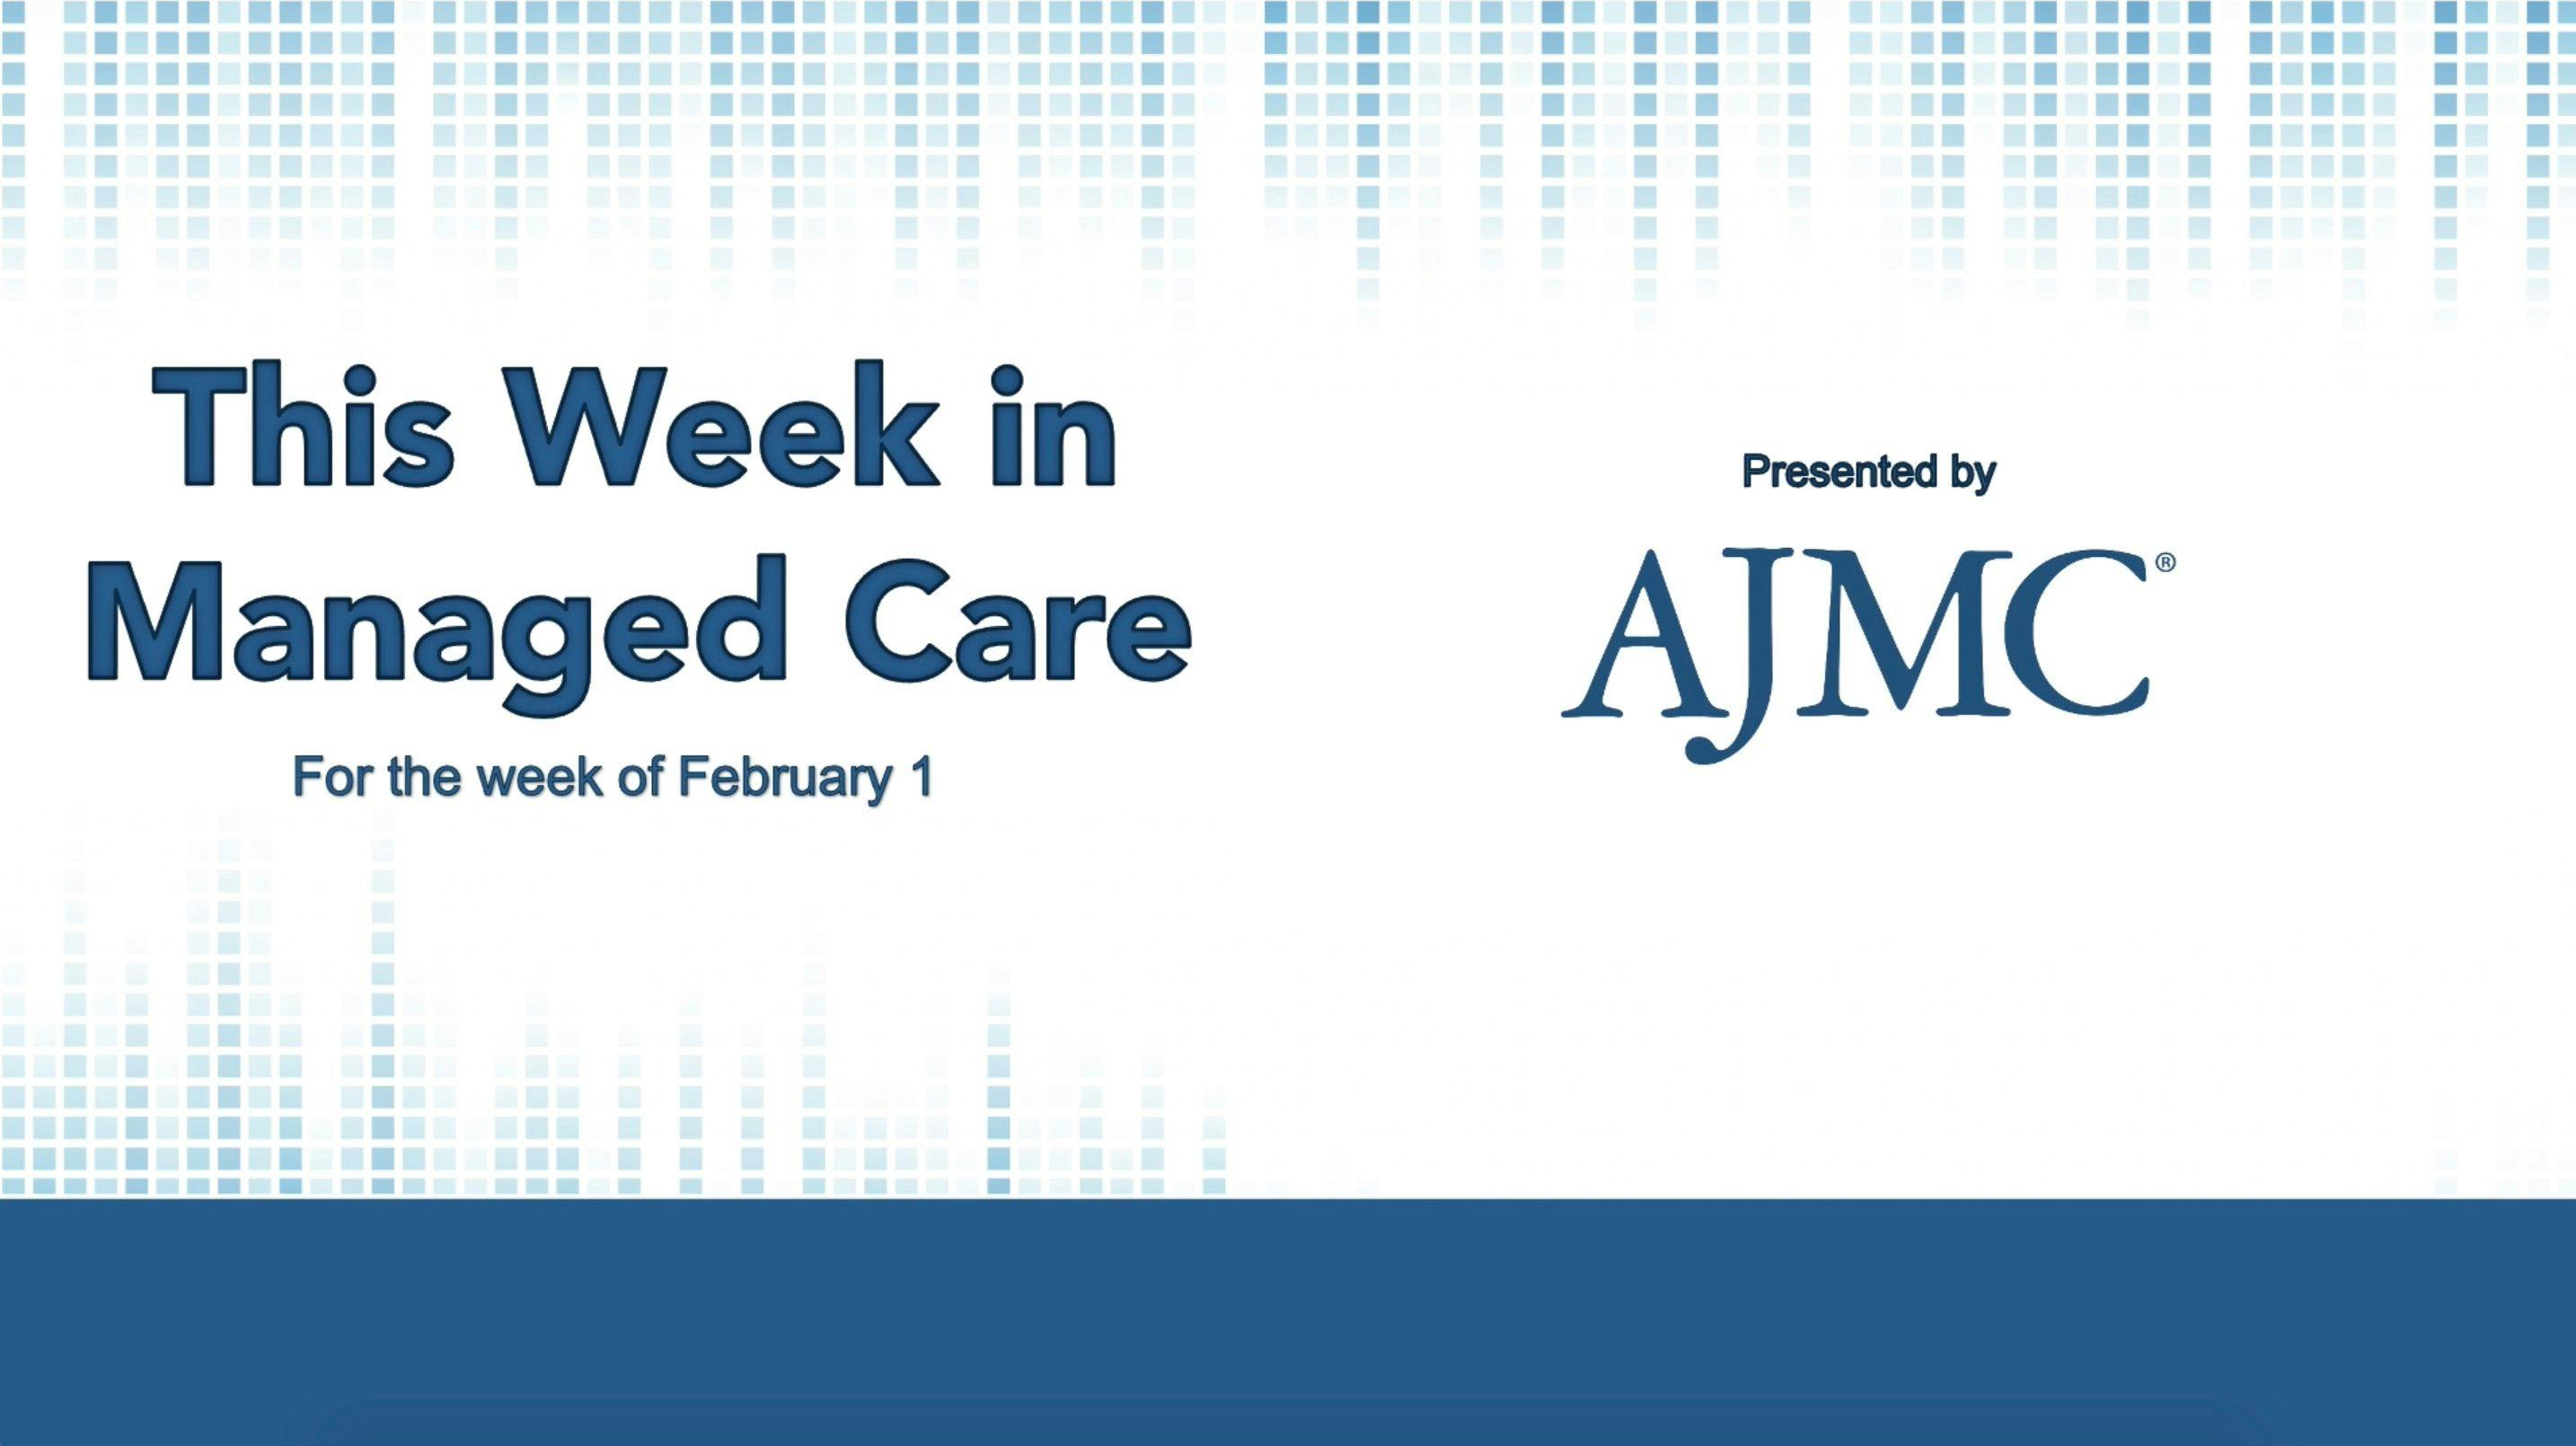 This Week in Managed Care: February 5, 2021